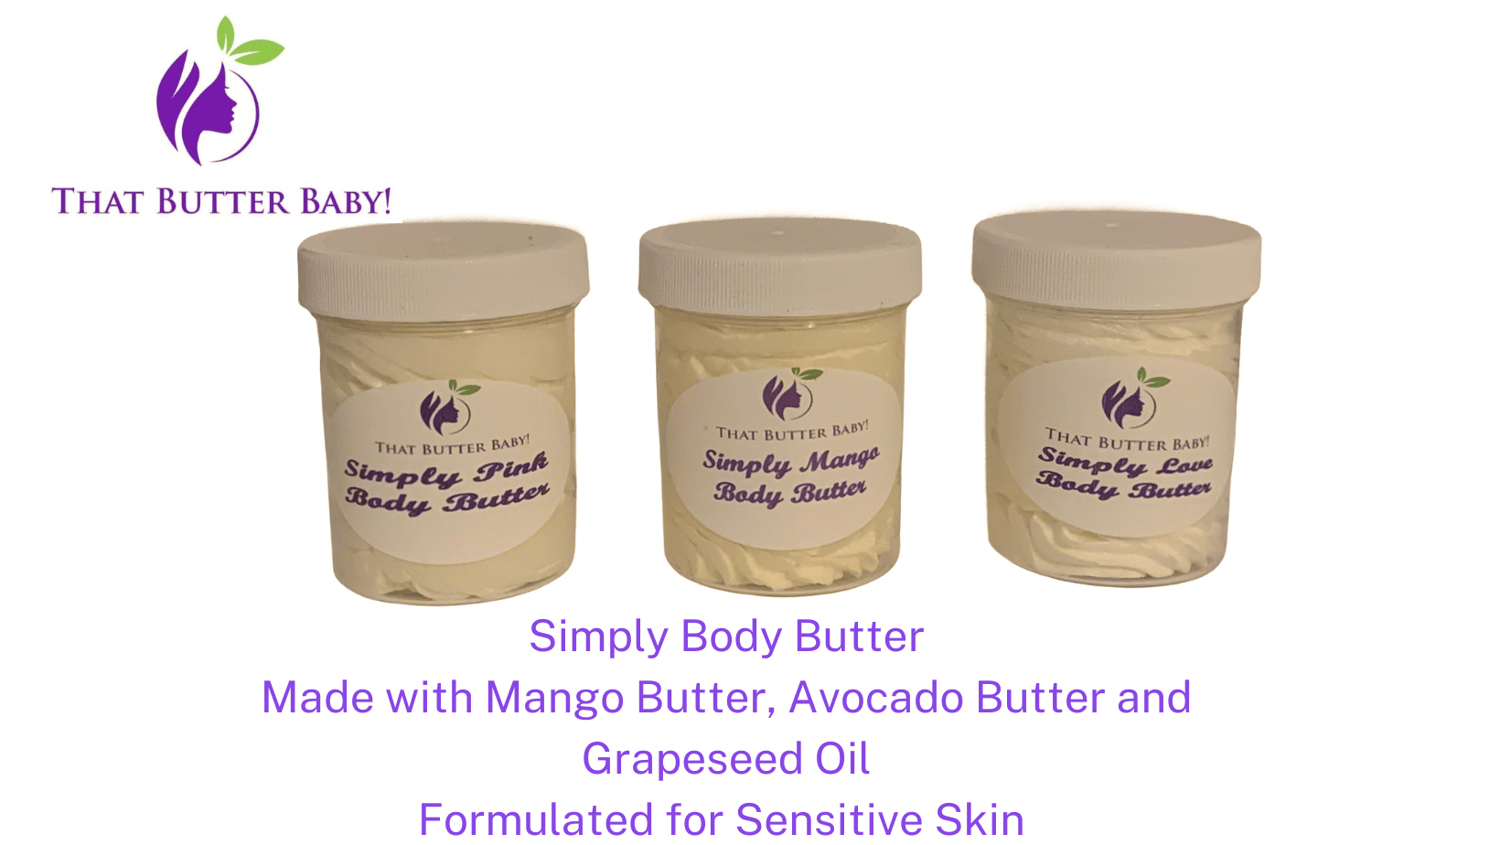 | That TBB Butter Baby BUTTER BODY SIMPLY